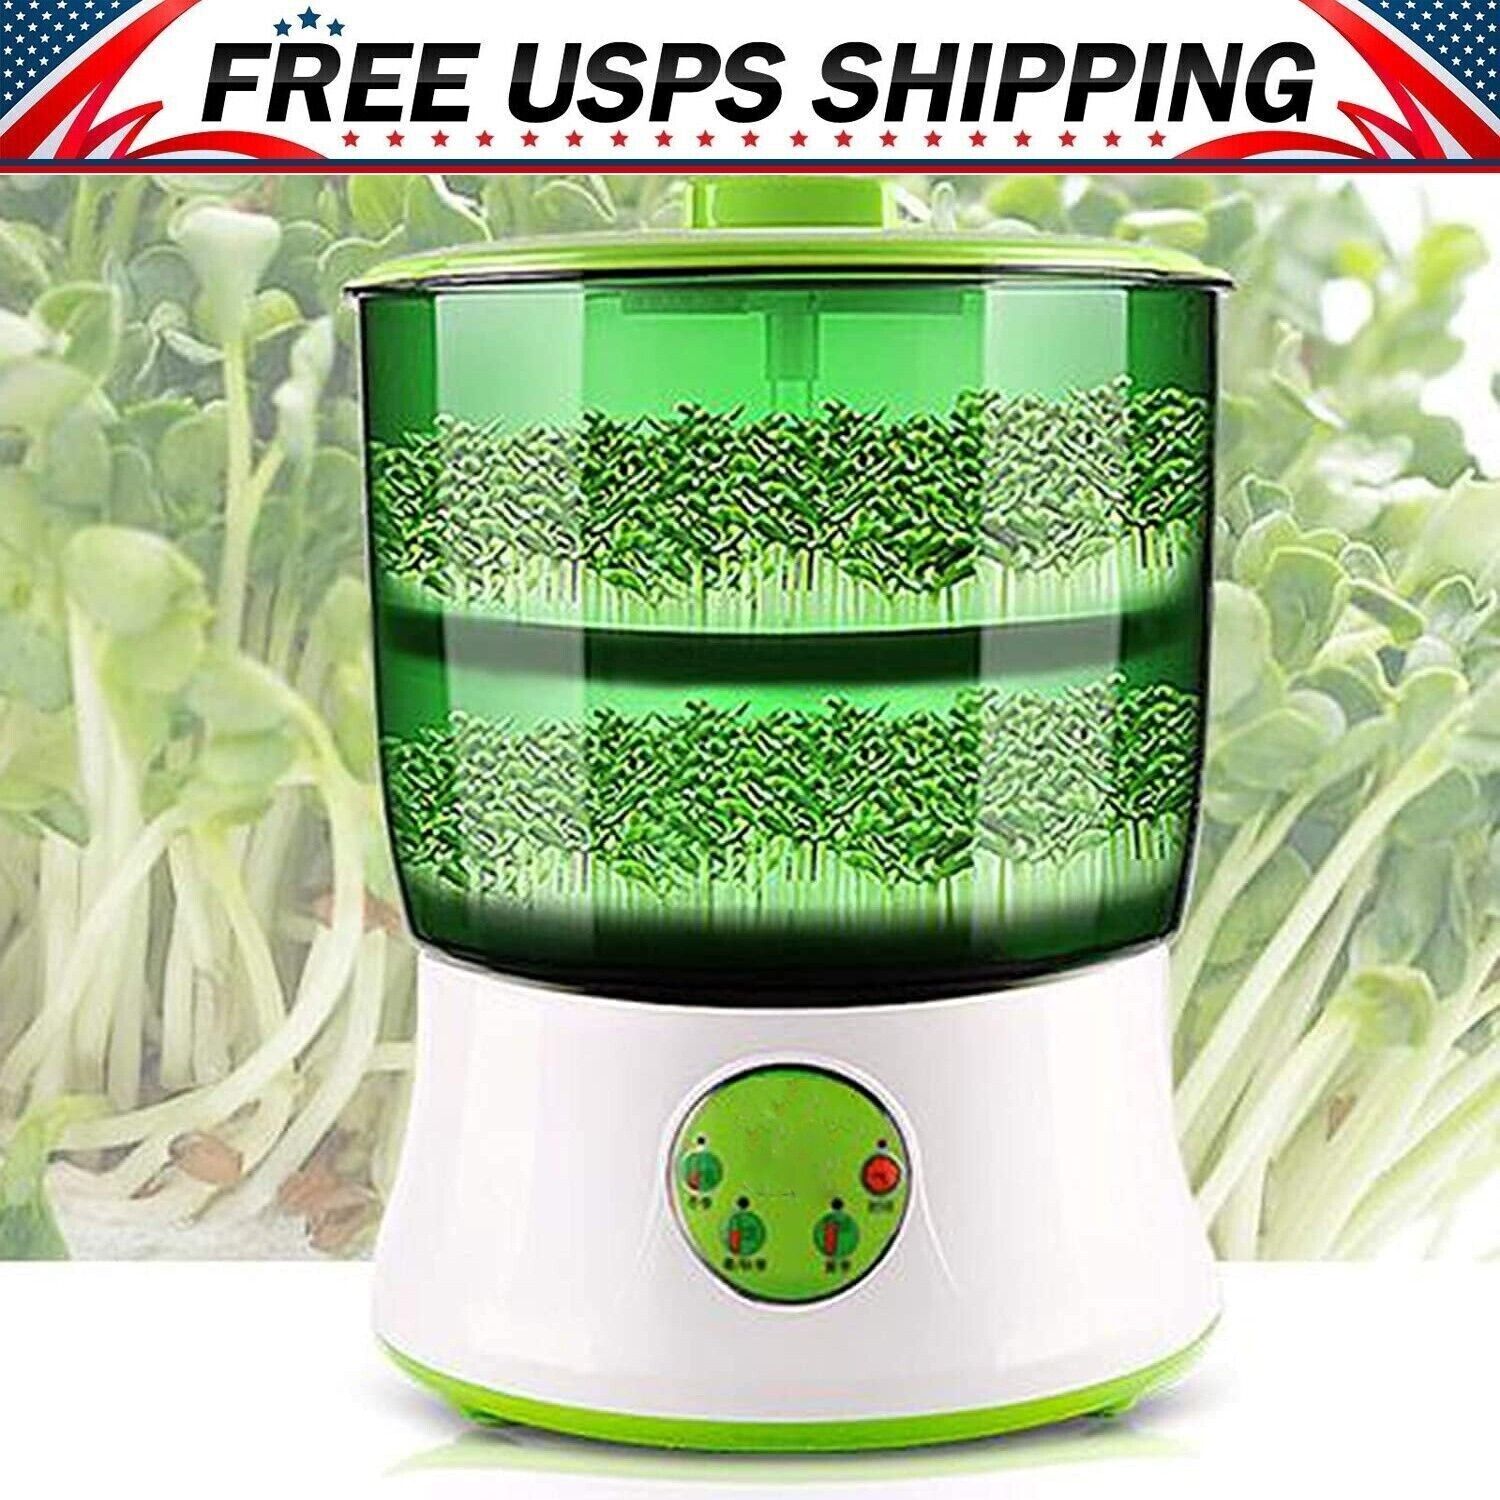 Intelligent Bean Sprouts Maker 2 Layer Automatic Vegetable Seed Growth Bucket